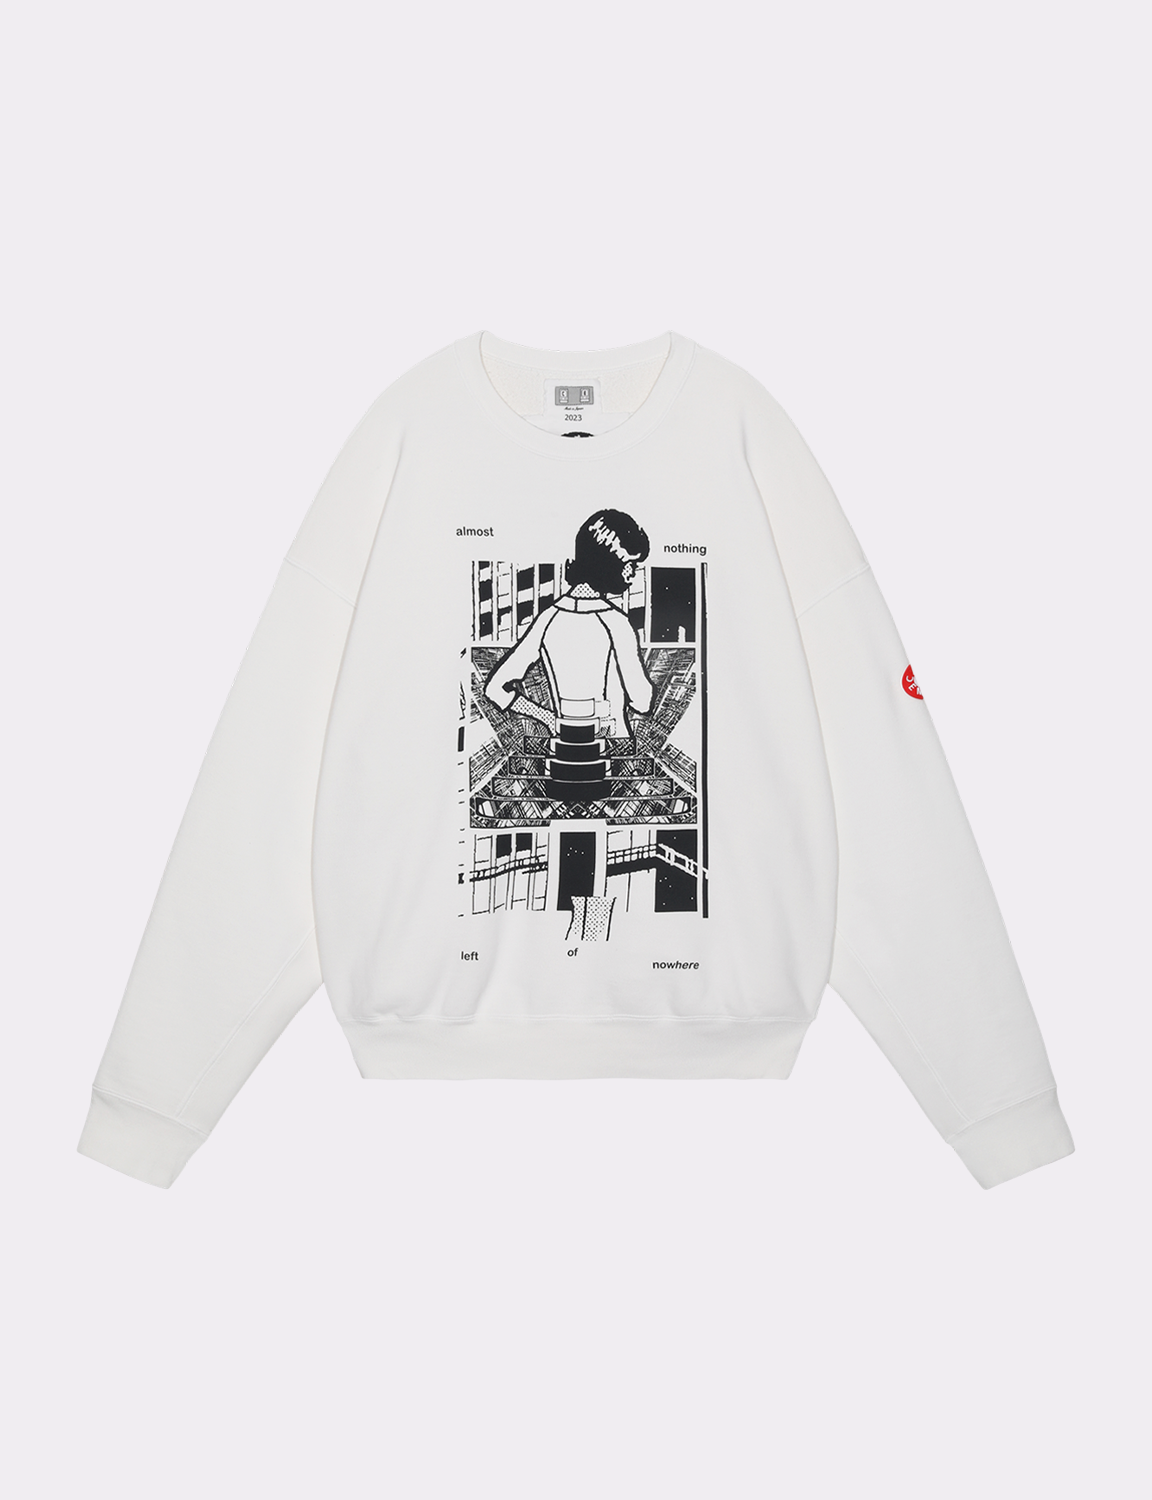 C.E - WASHED MD NOTHING CREW NECK – The